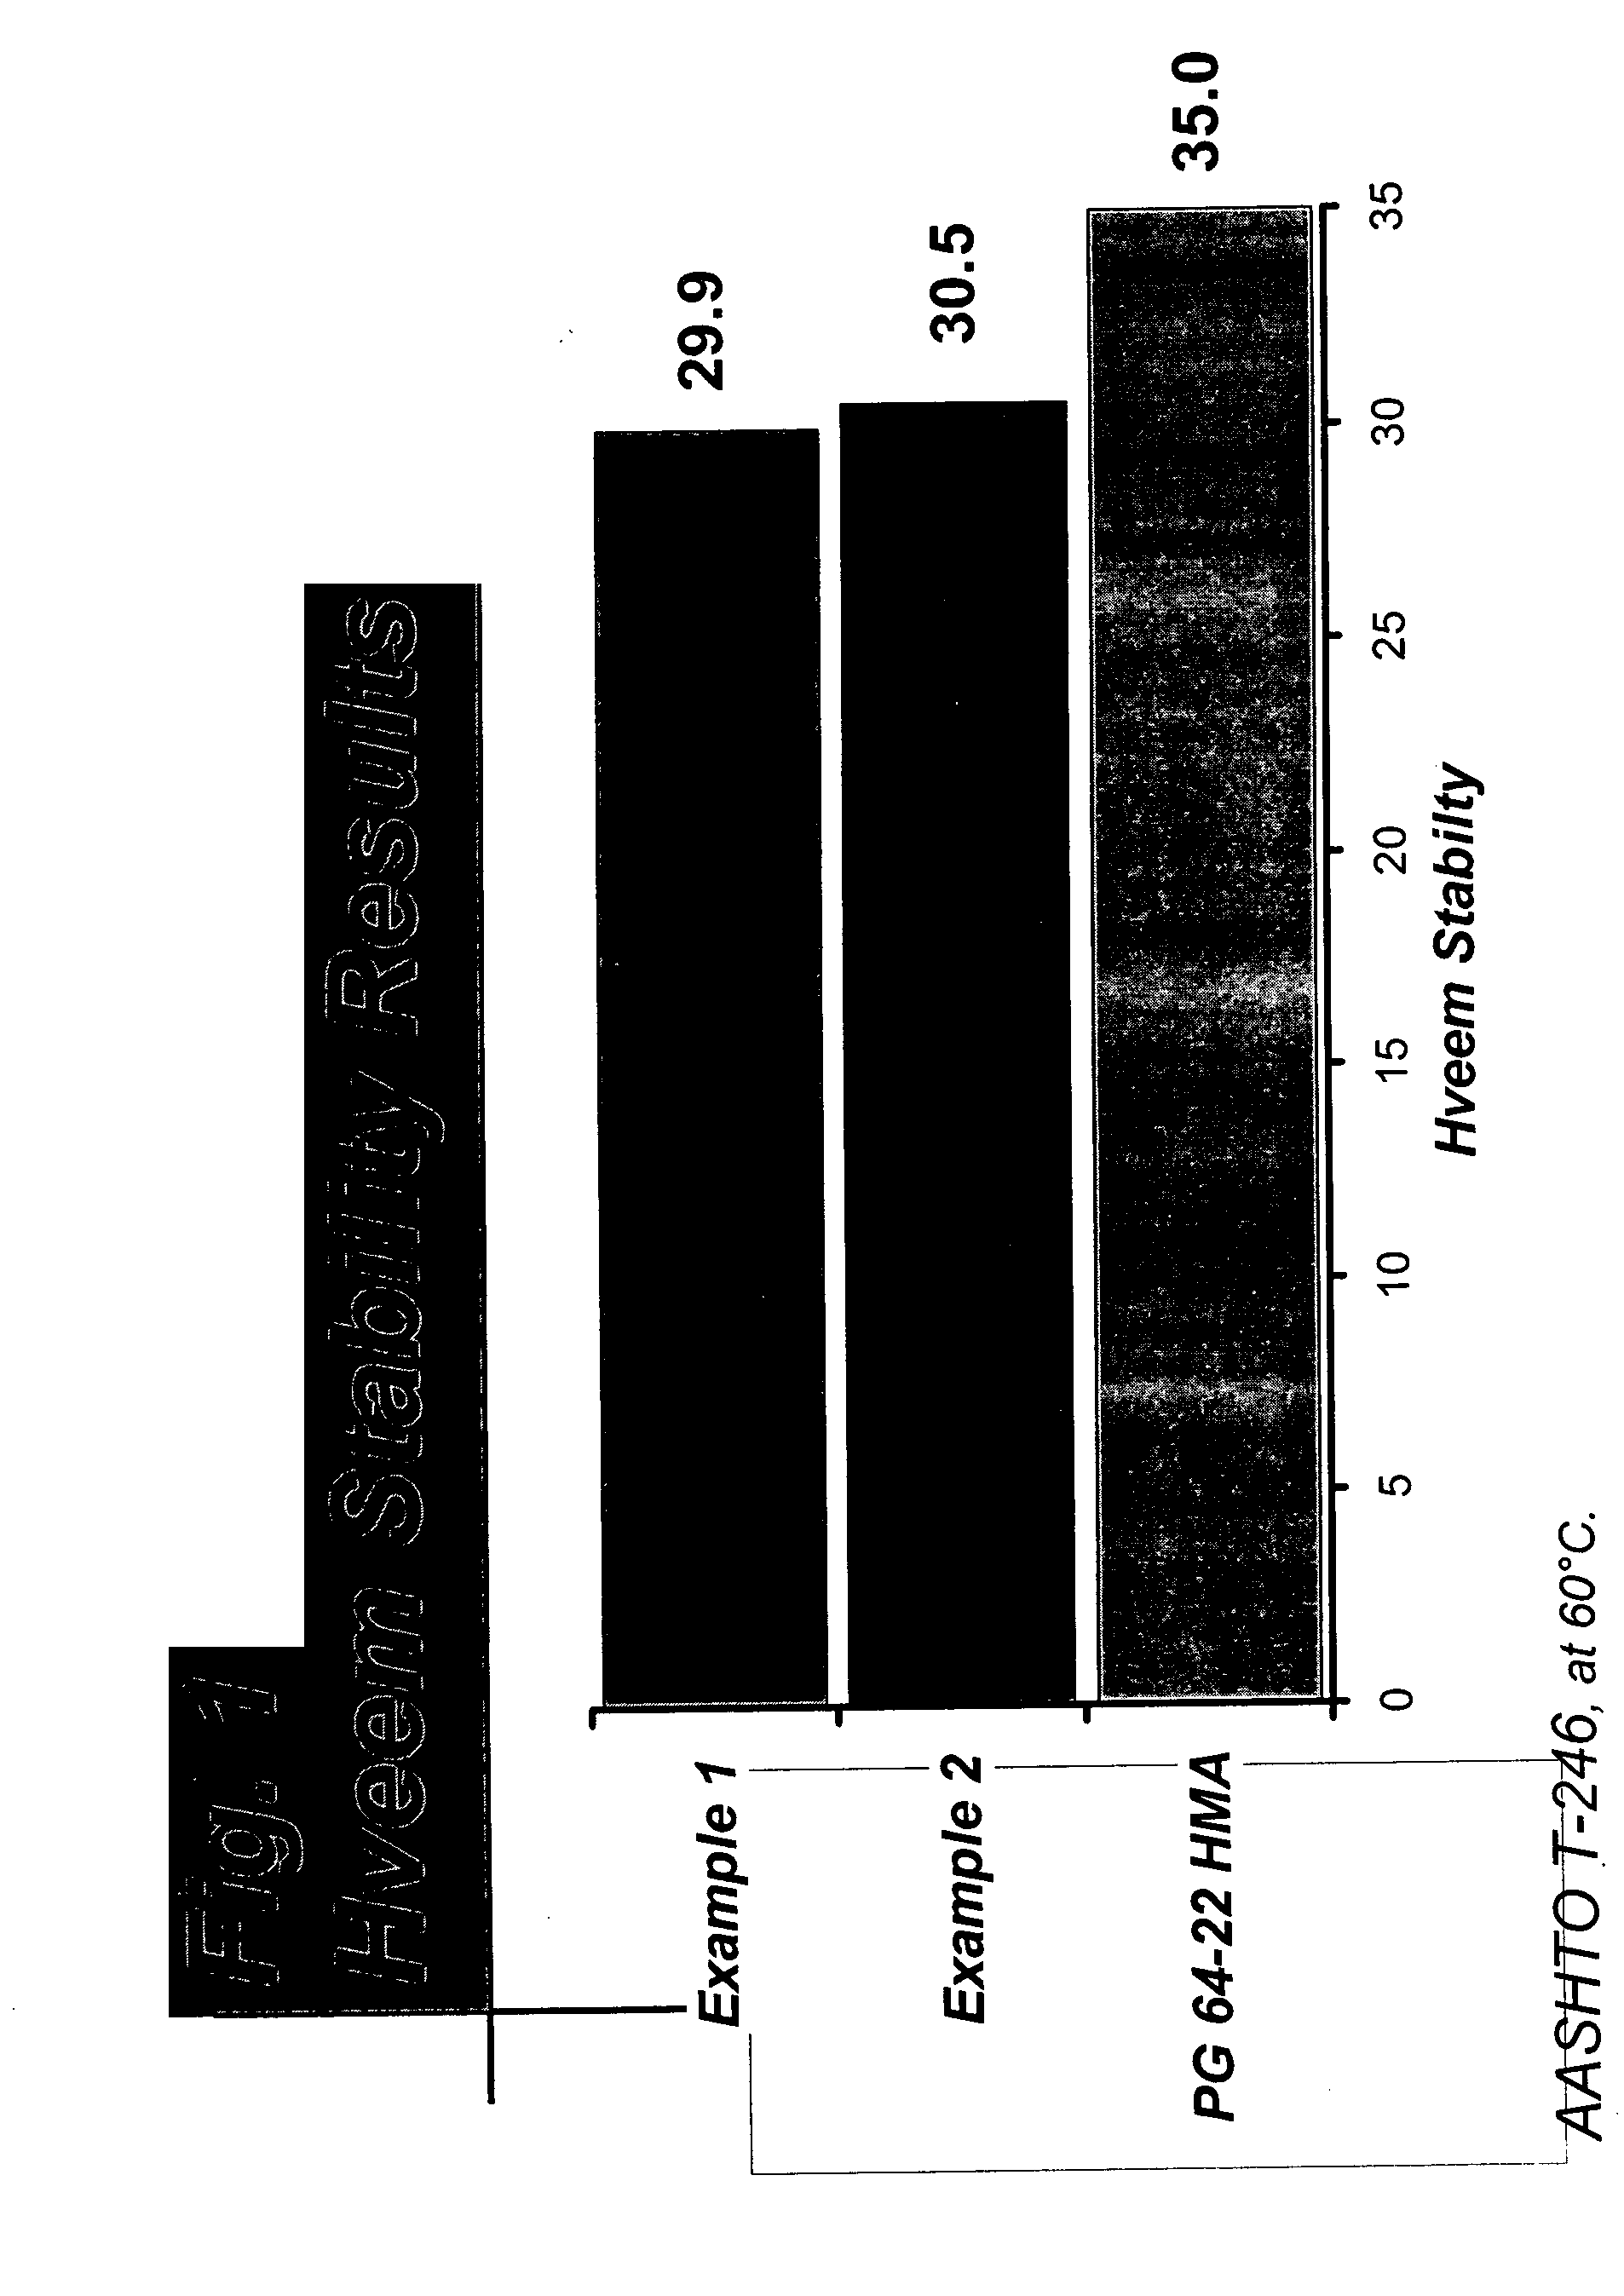 Reflective crack relief pavement interlayer with improved load bearing capacity and method for designing interlayer